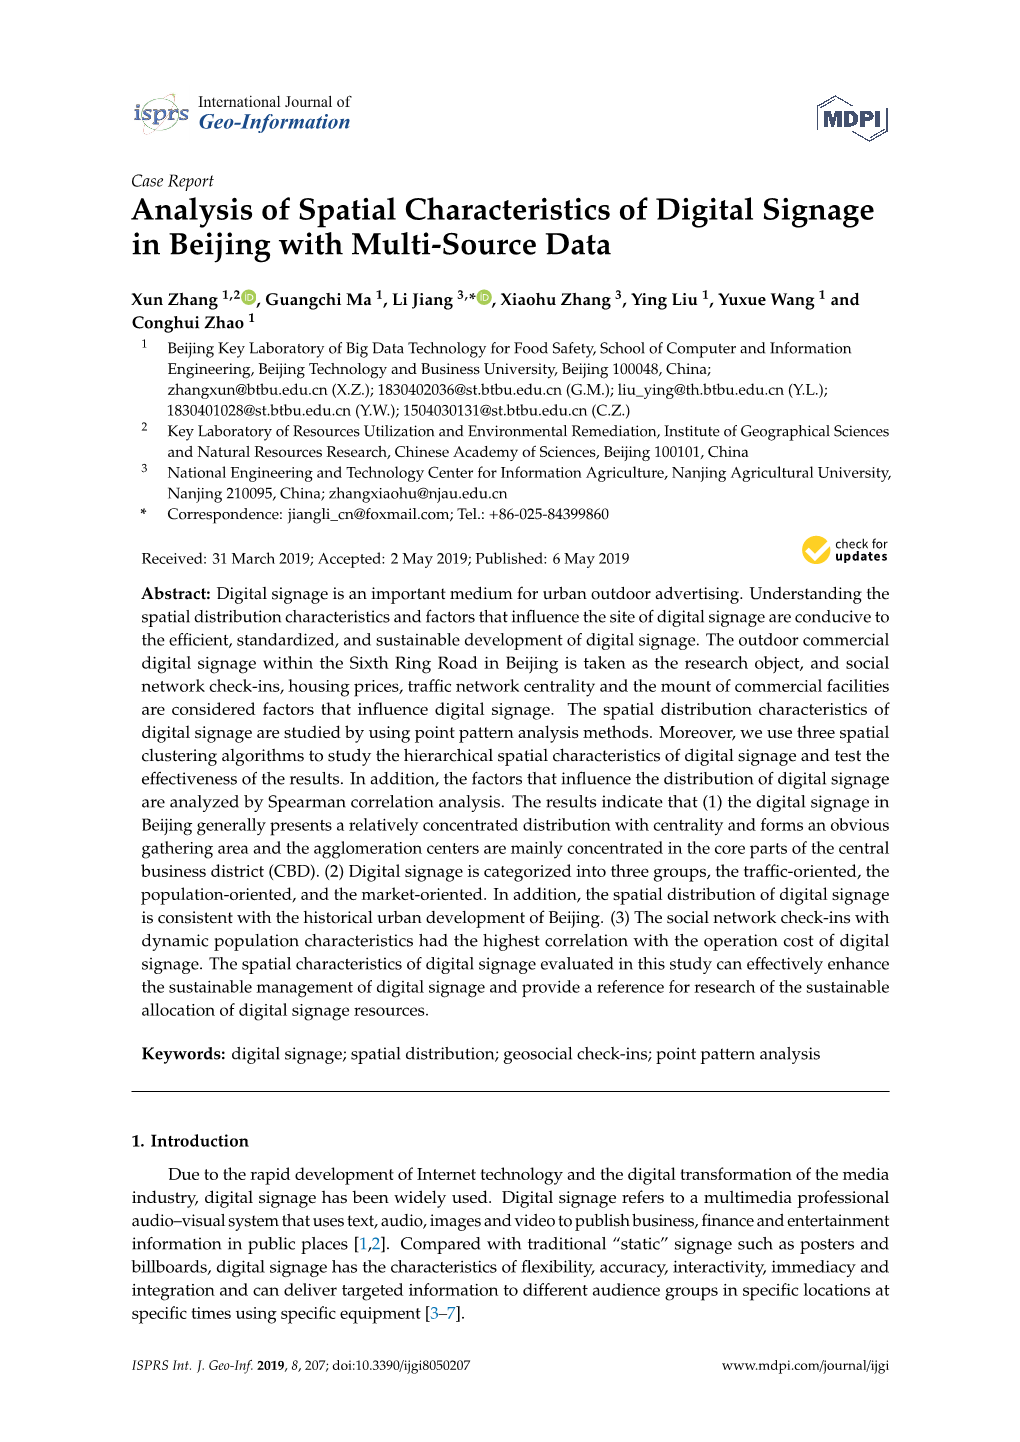 Analysis of Spatial Characteristics of Digital Signage in Beijing with Multi-Source Data